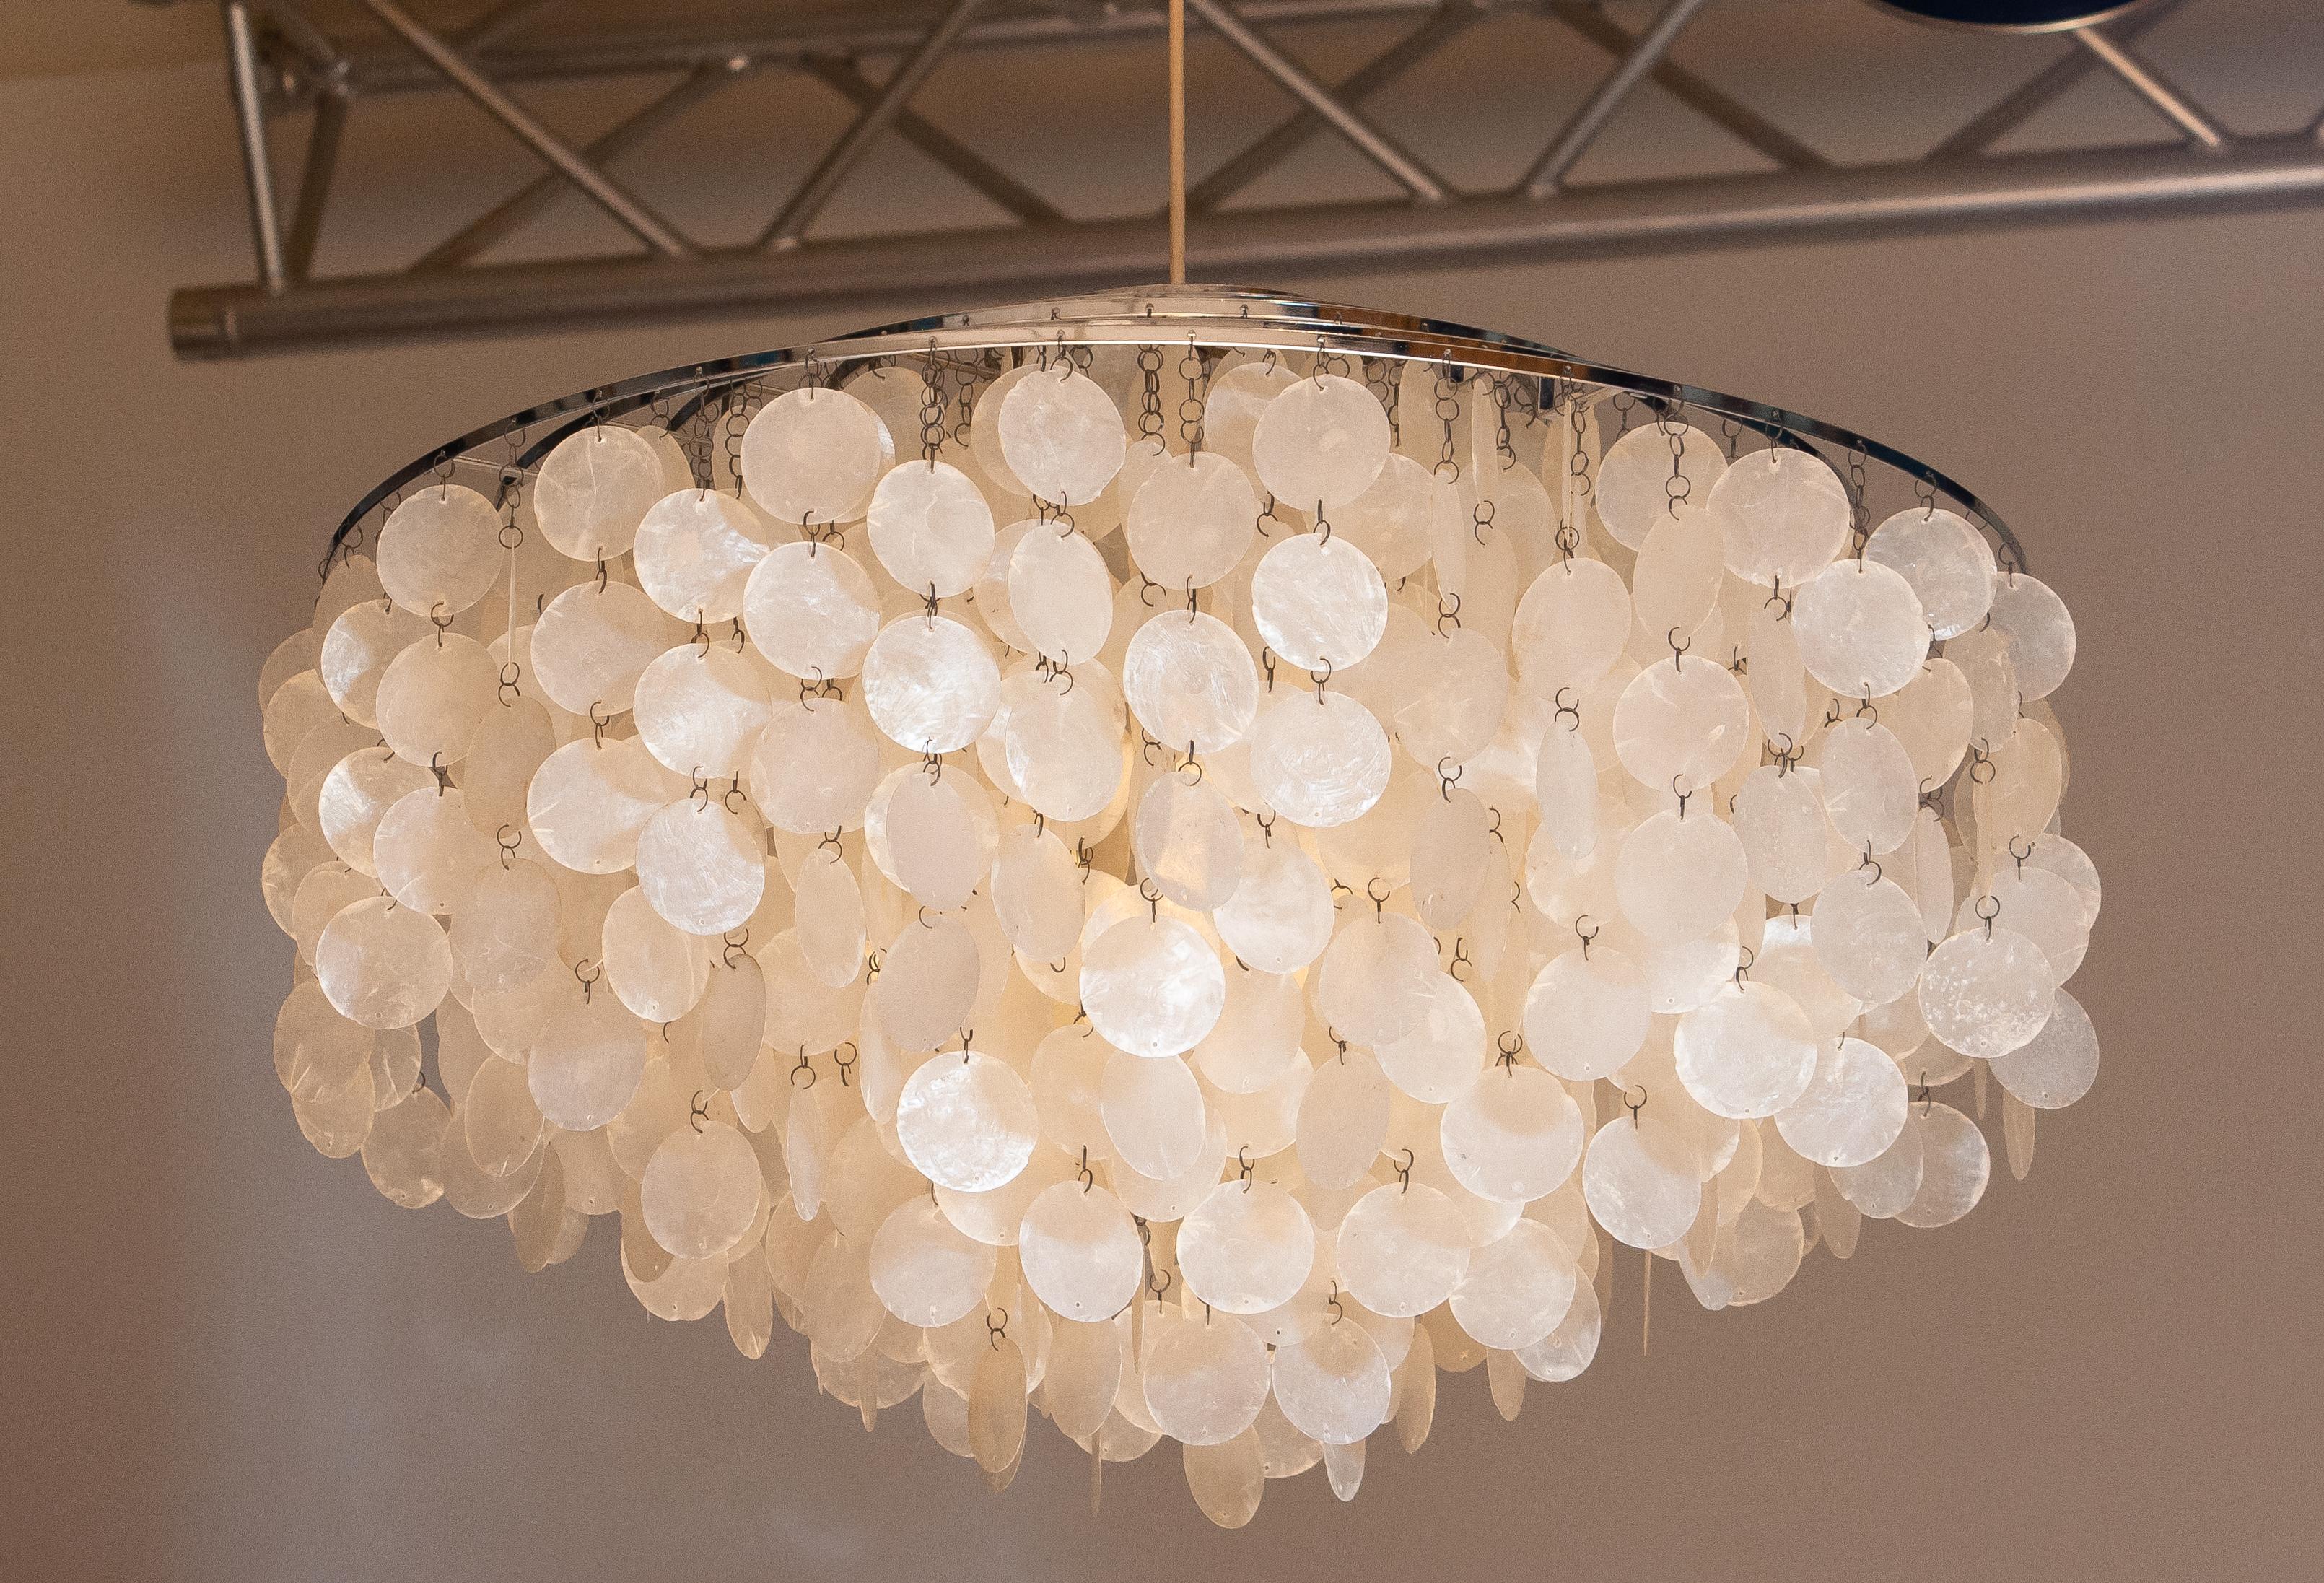 Pair of Extra Large Capiz Shell Chandeliers by Verner Panton for Luber AG. Swiss 8